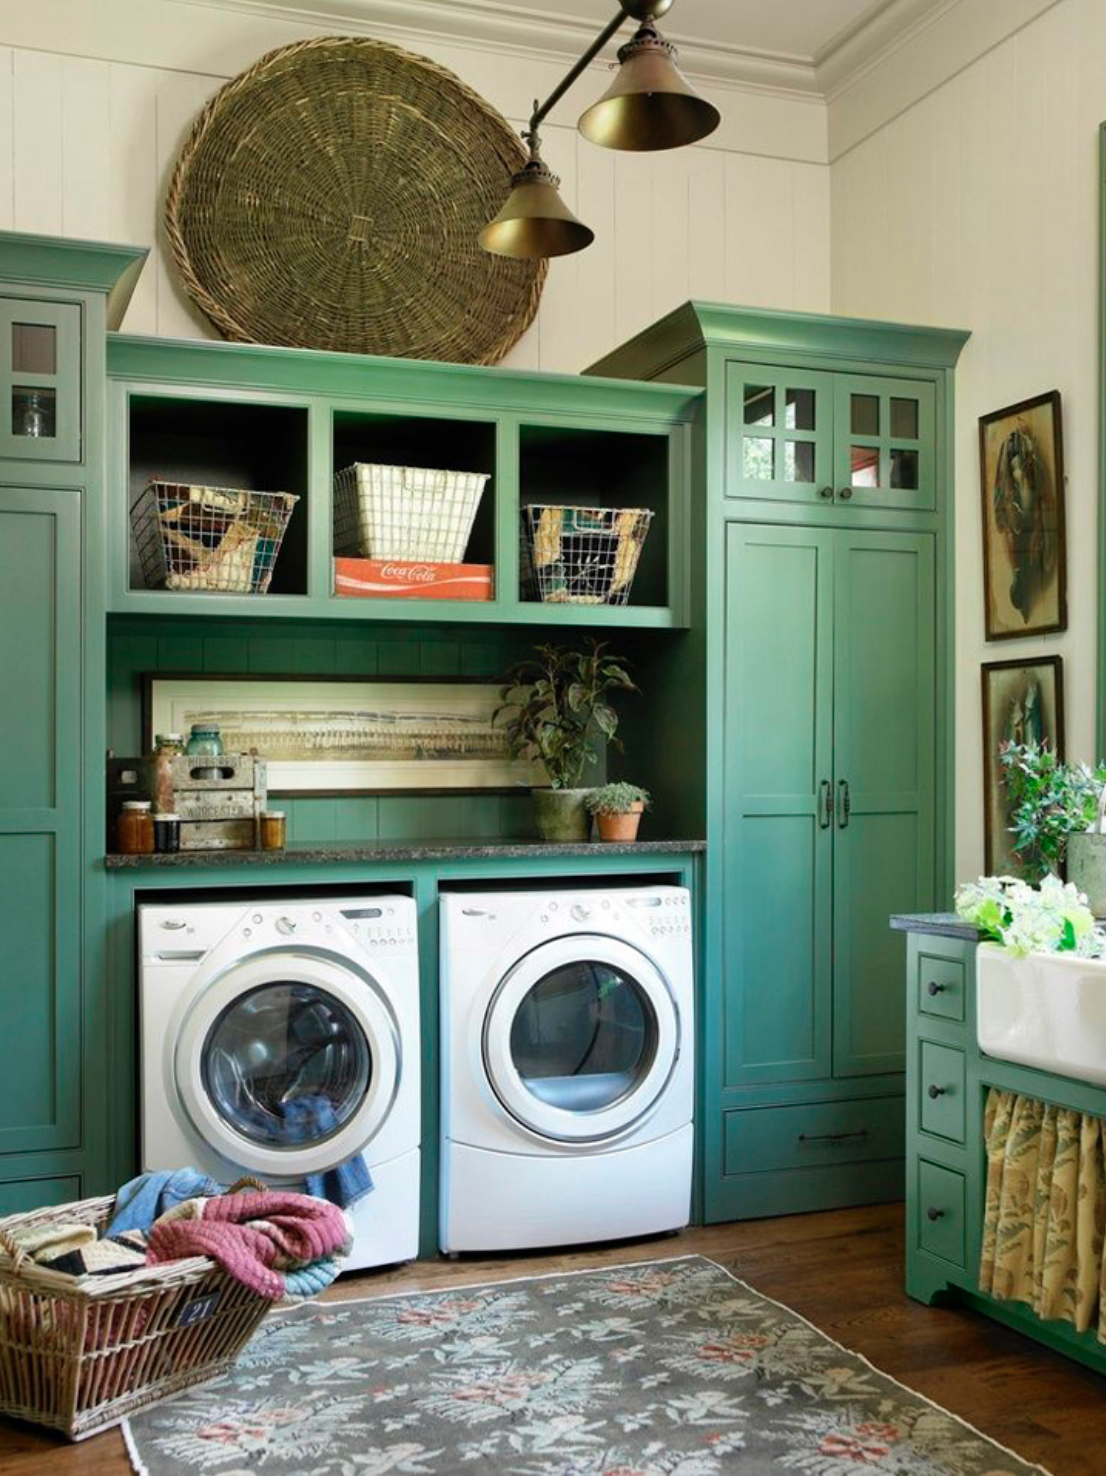 Is Your Laundry the Victim of A Faulty Washer?